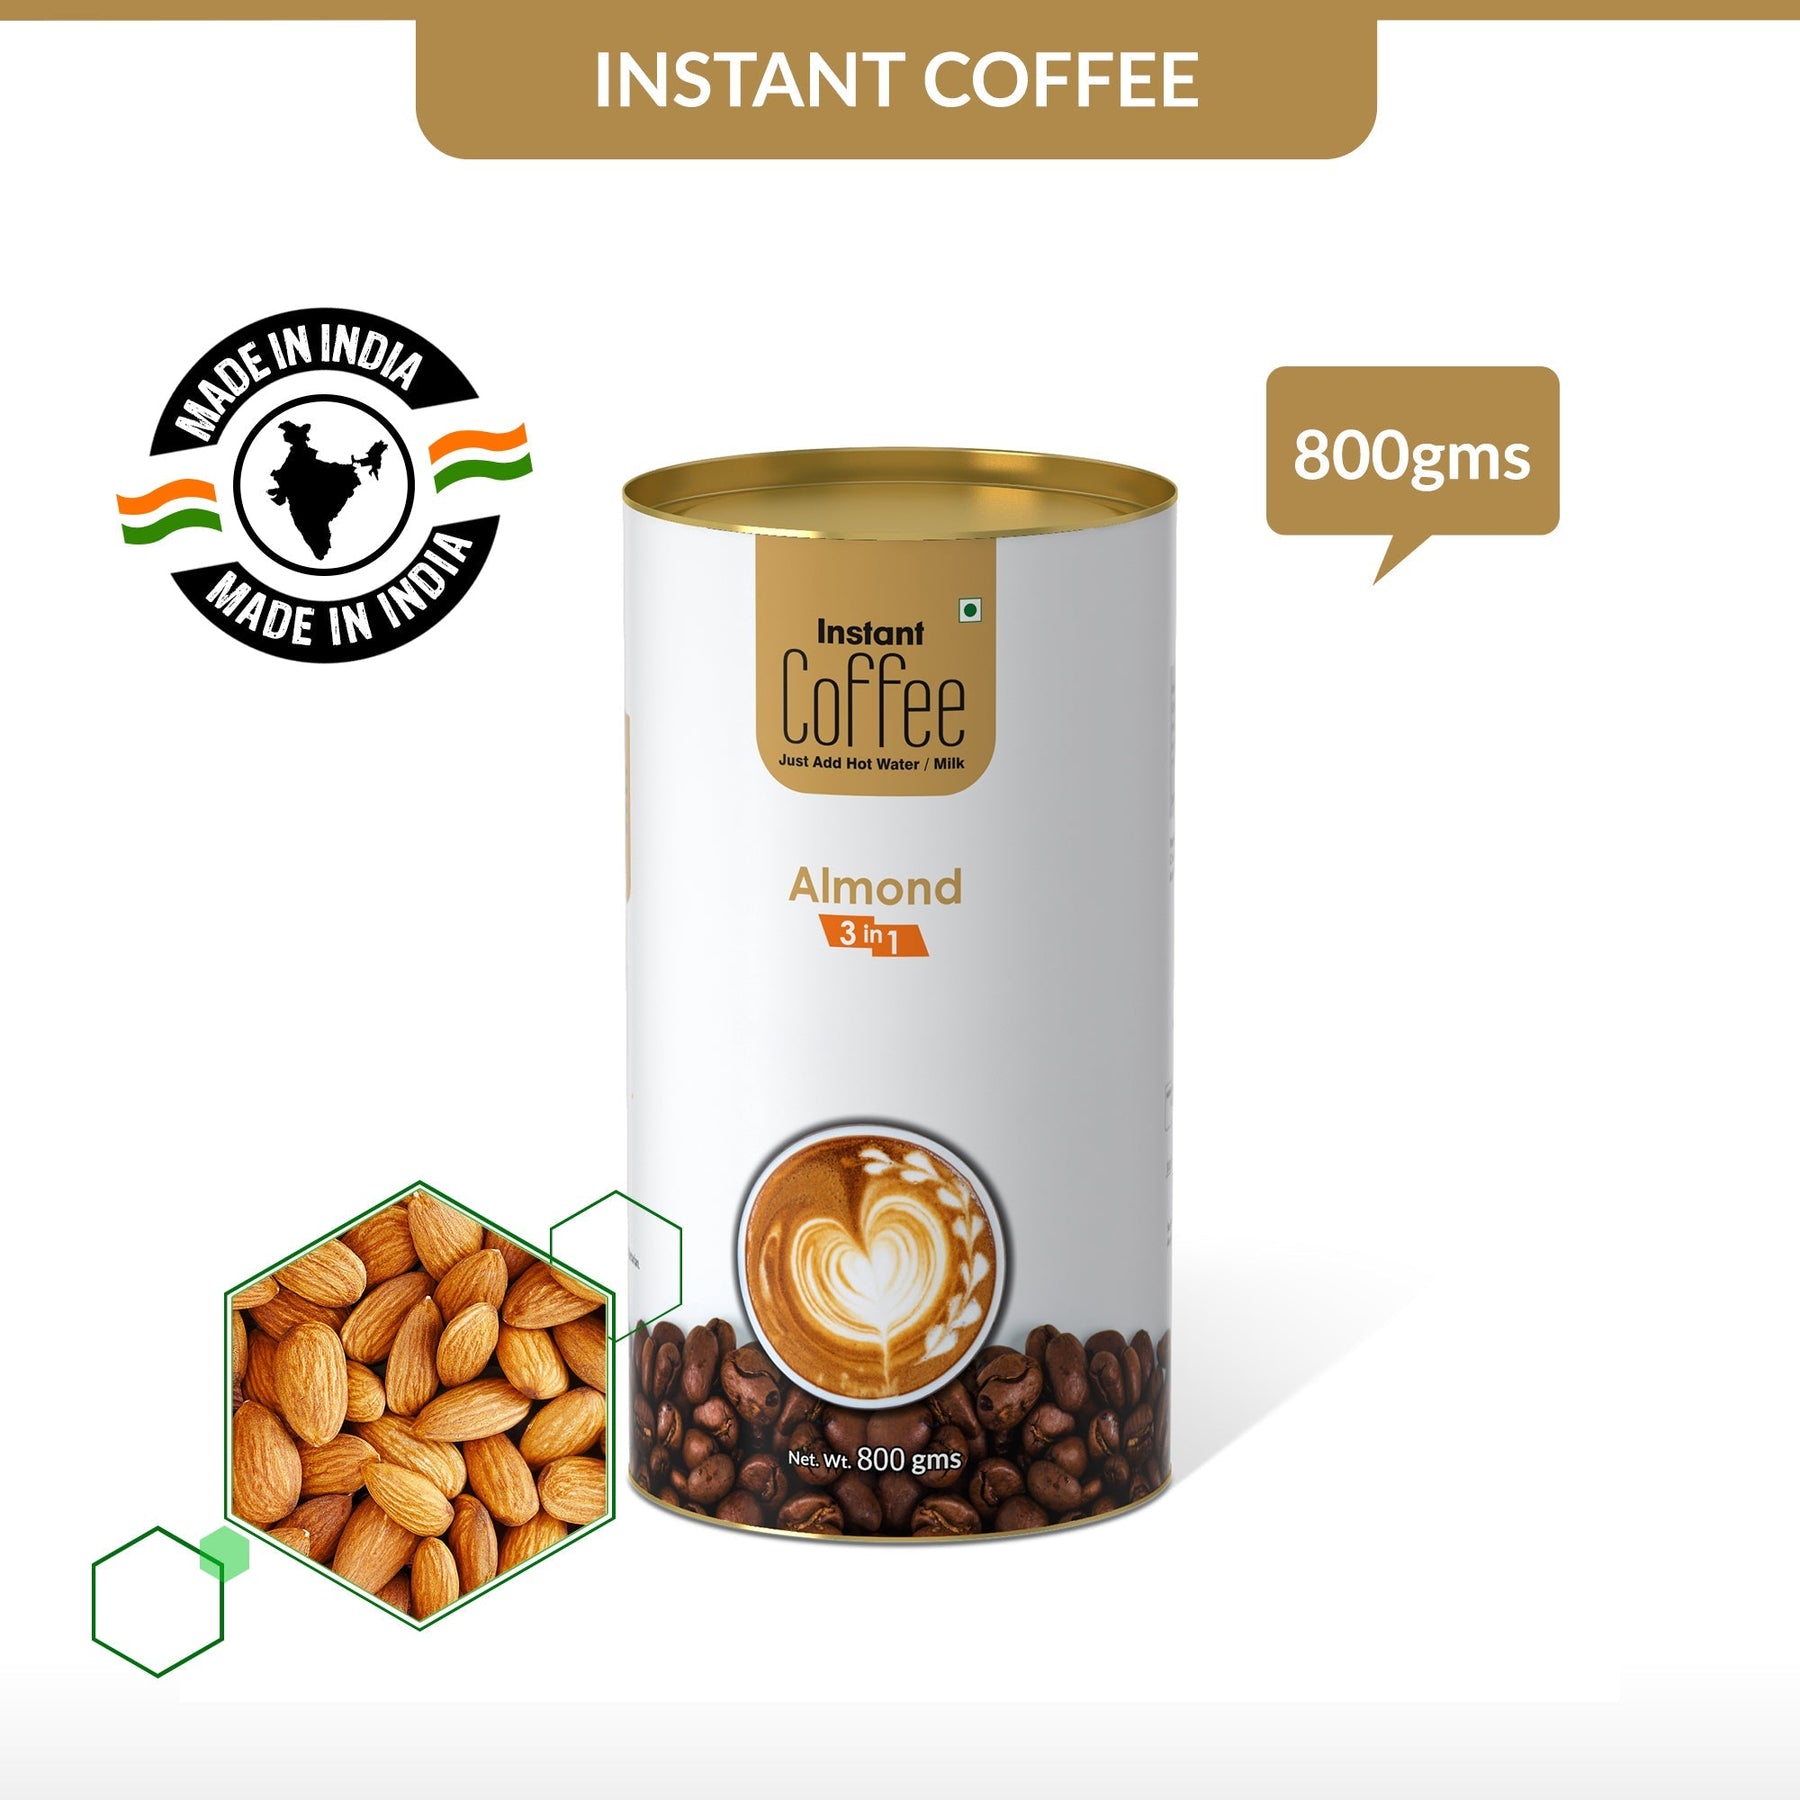 Almond Instant Coffee Premix (3 in 1) - 400 gms